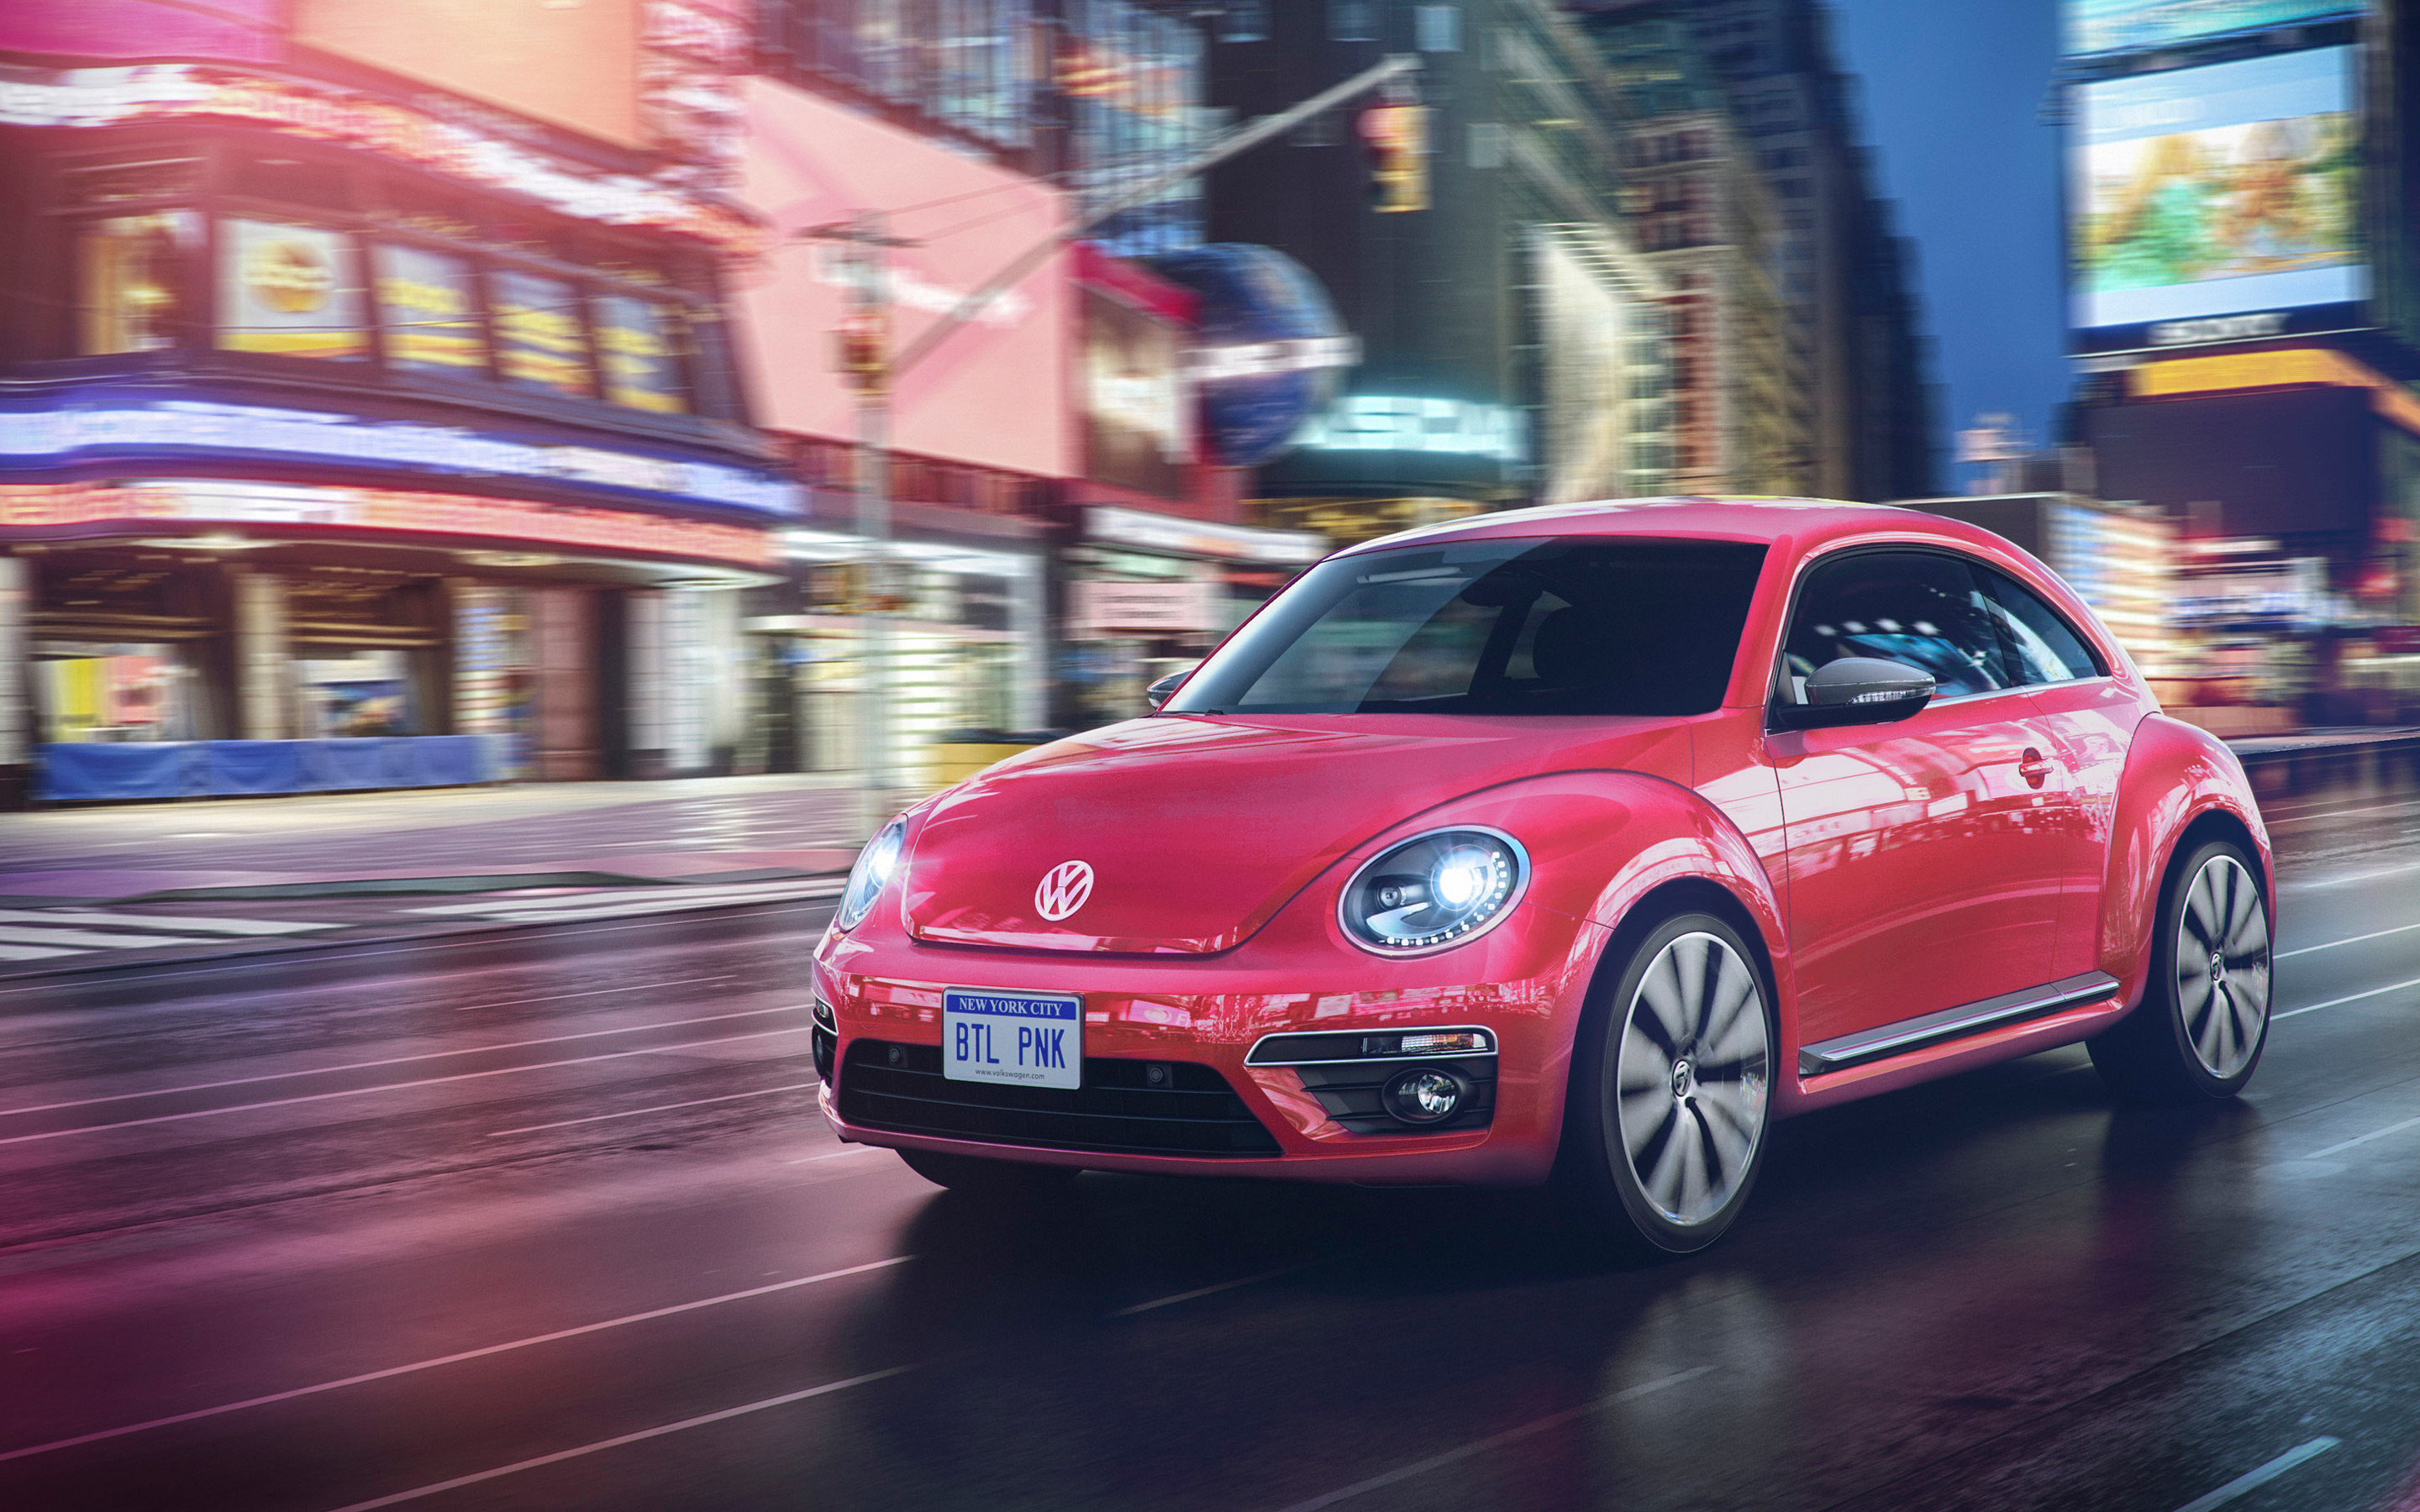 2017 Volkswagen Pink Beetle Limited Edition